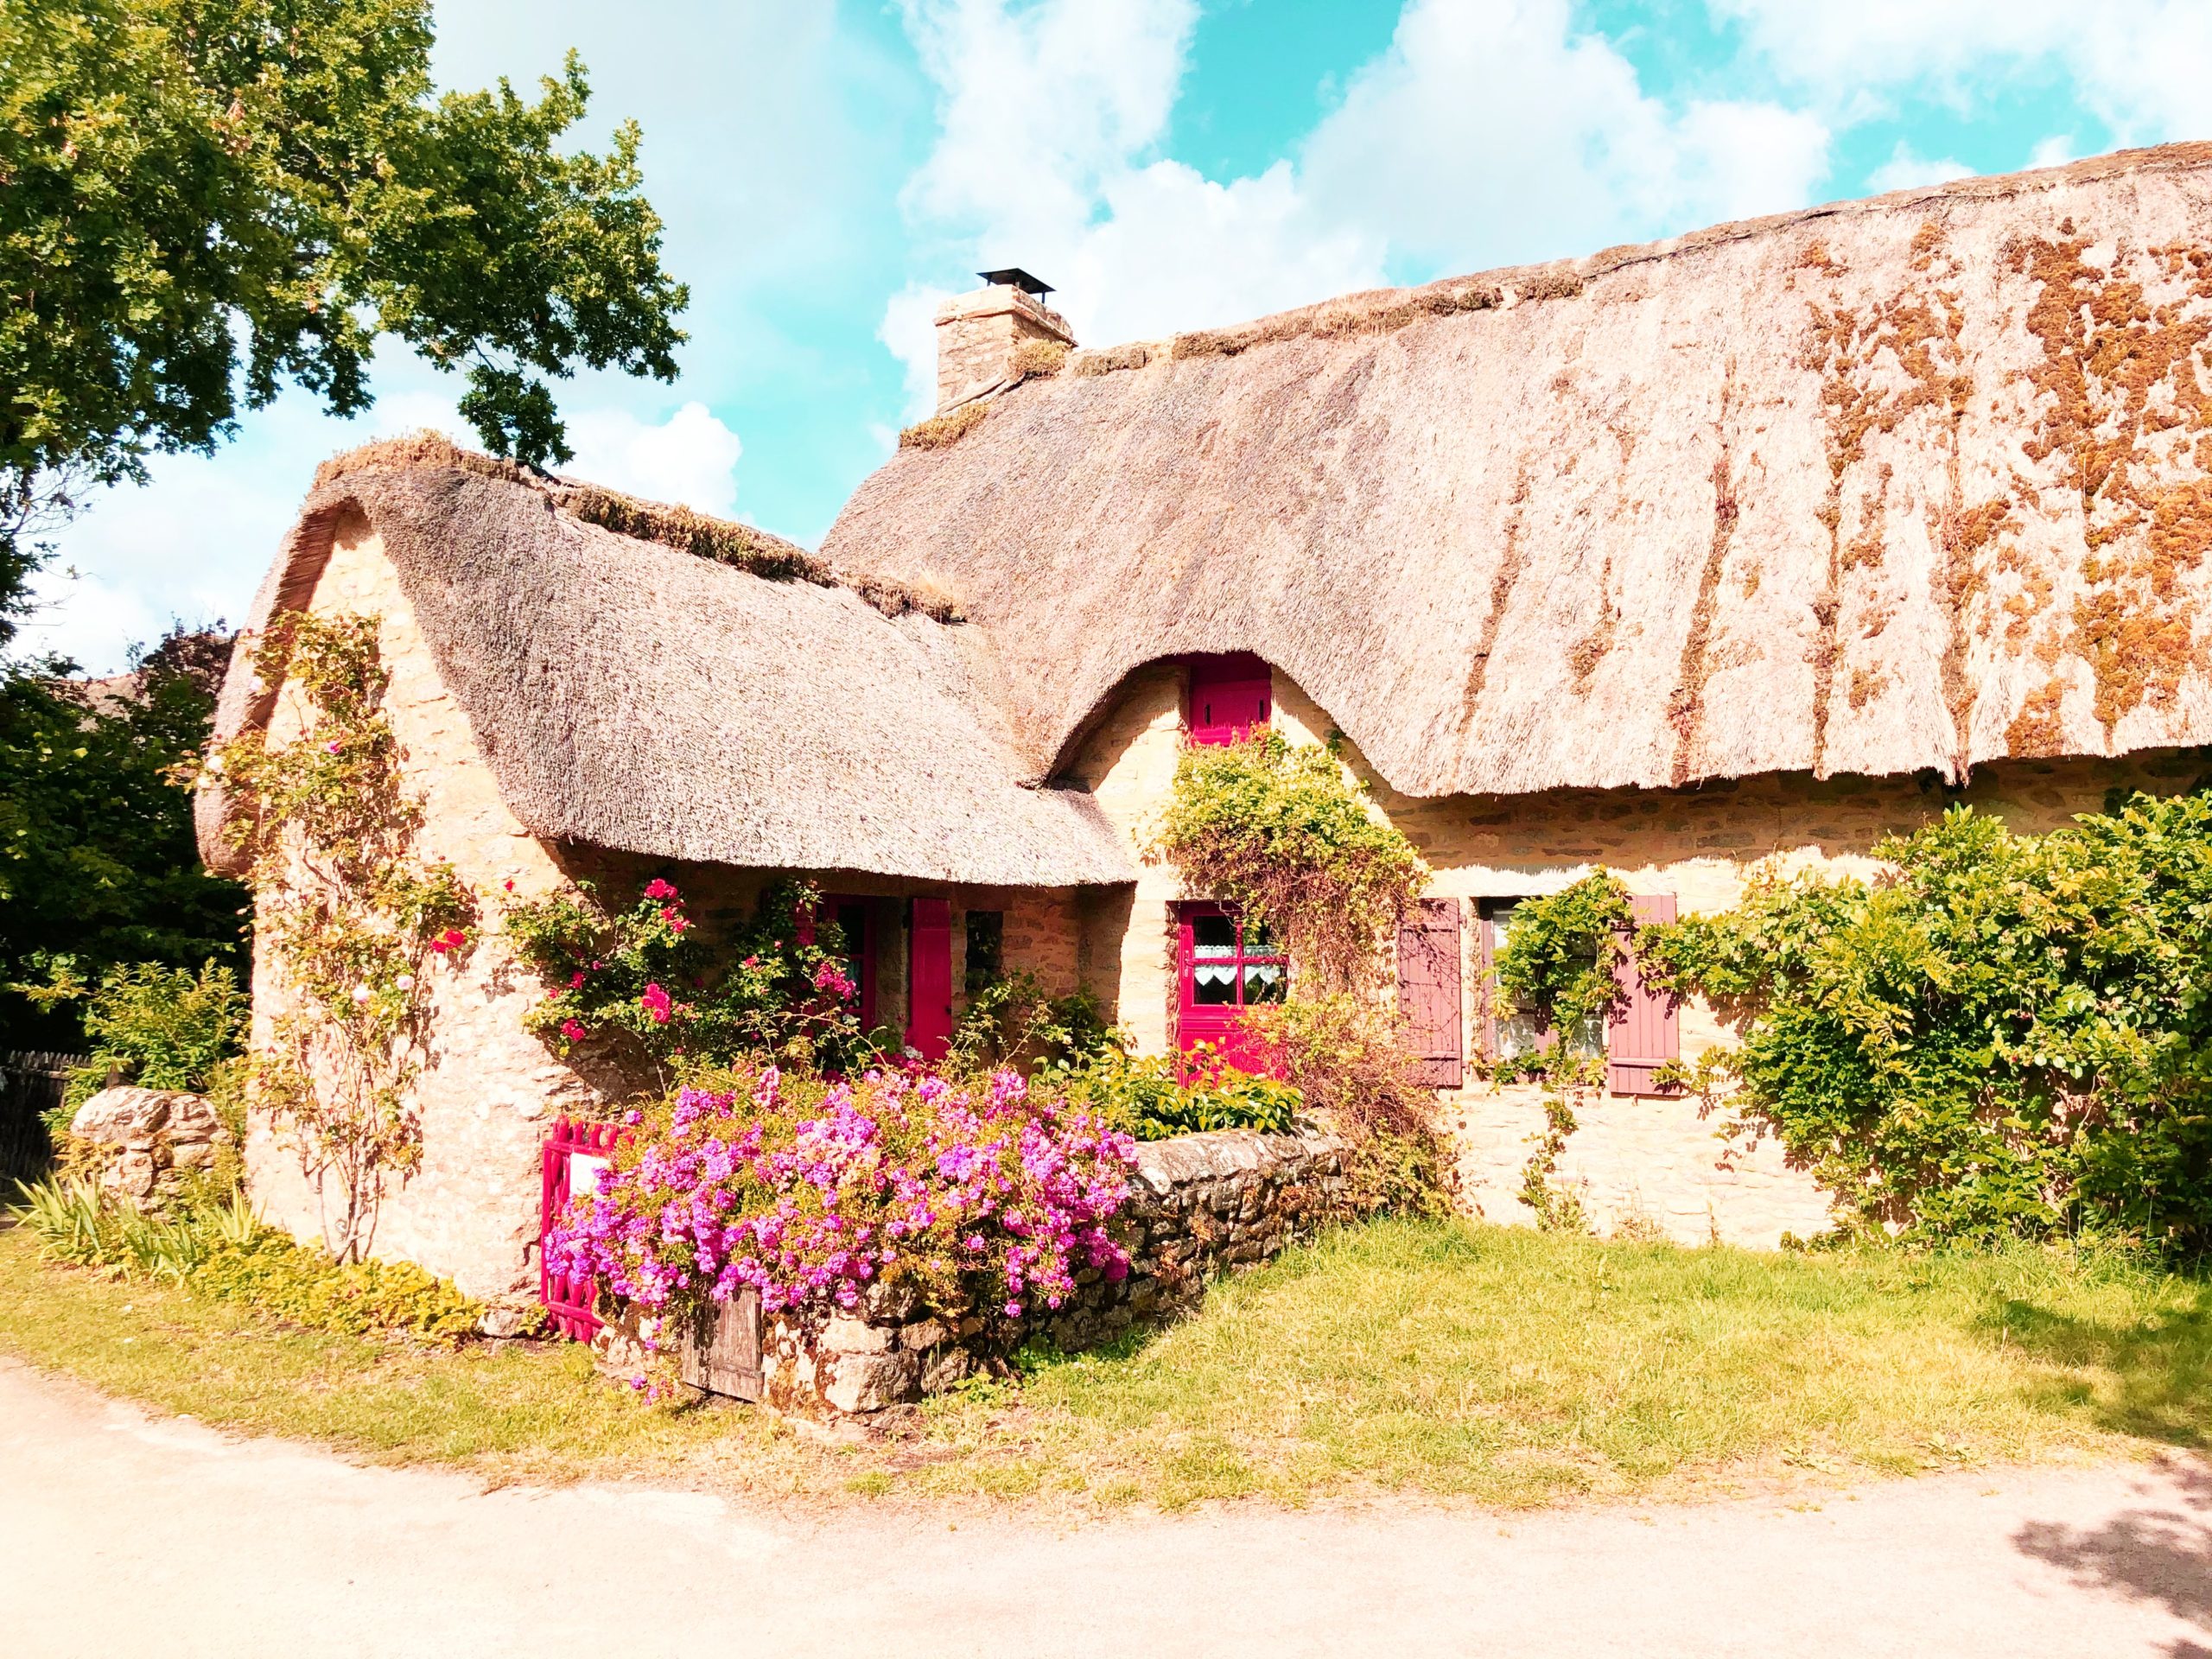 <img src="gorgeous.jpg" alt="gorgeous large cottage for remote workers"/> 